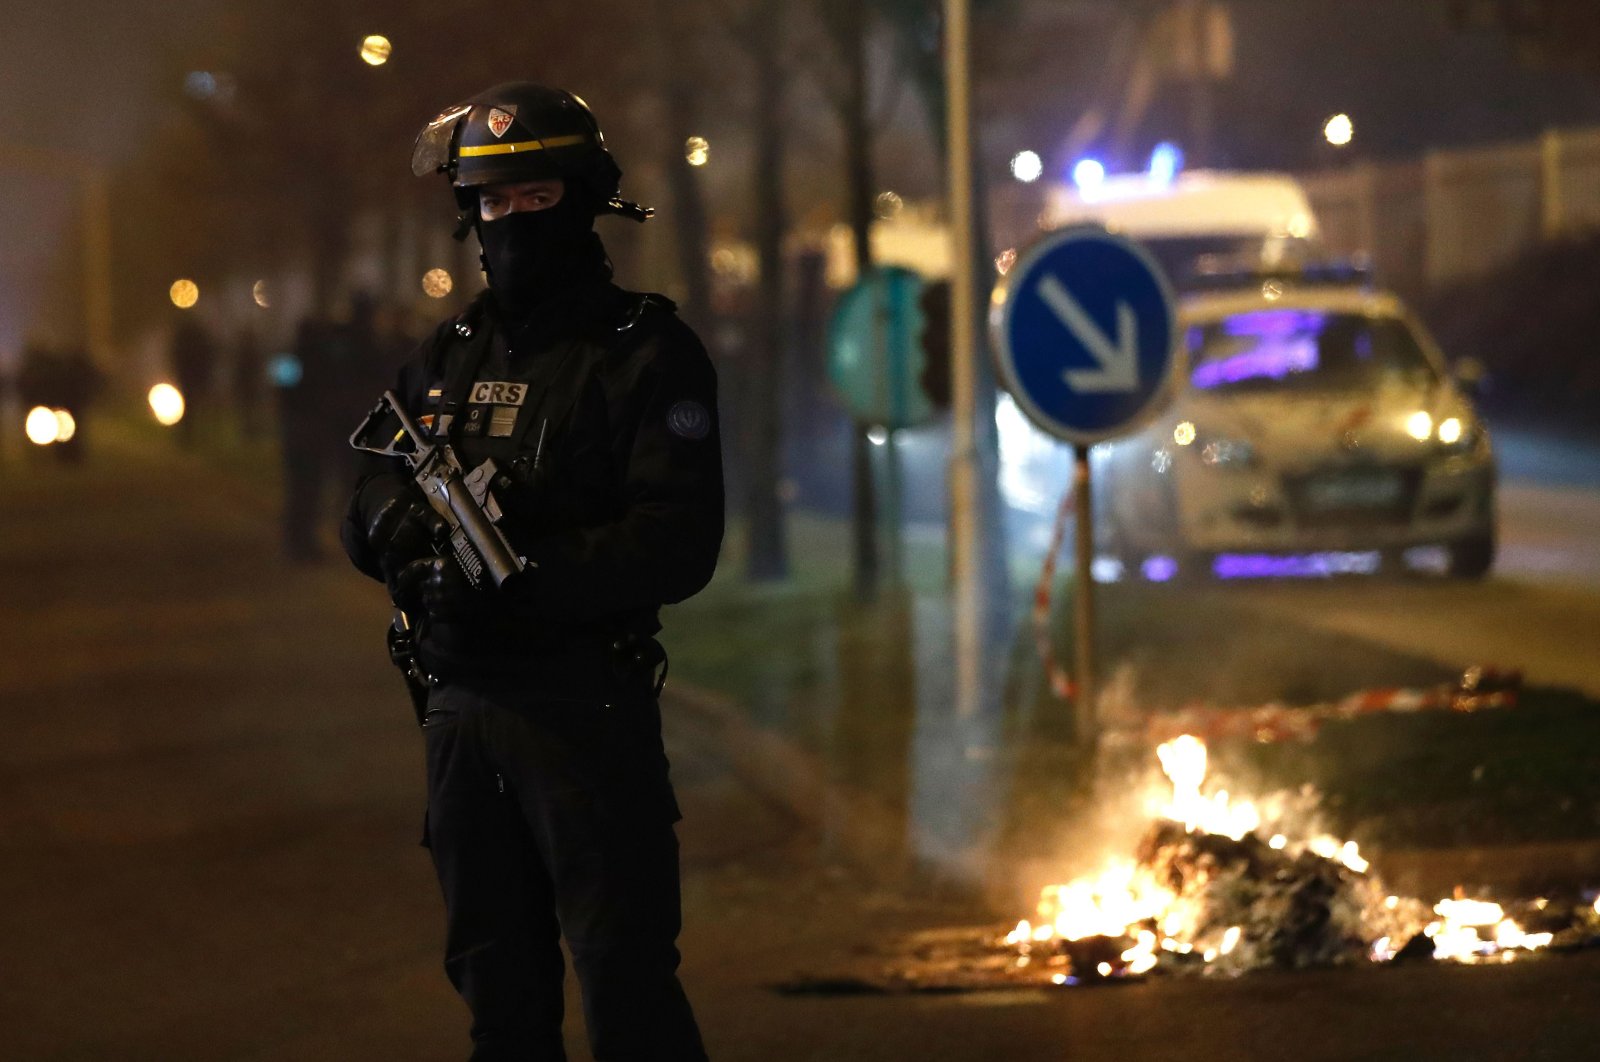 A French riot police officer secures the area during a protest in Bobigny, a district of northeast Paris, Feb. 11, 2017. (AFP Photo)